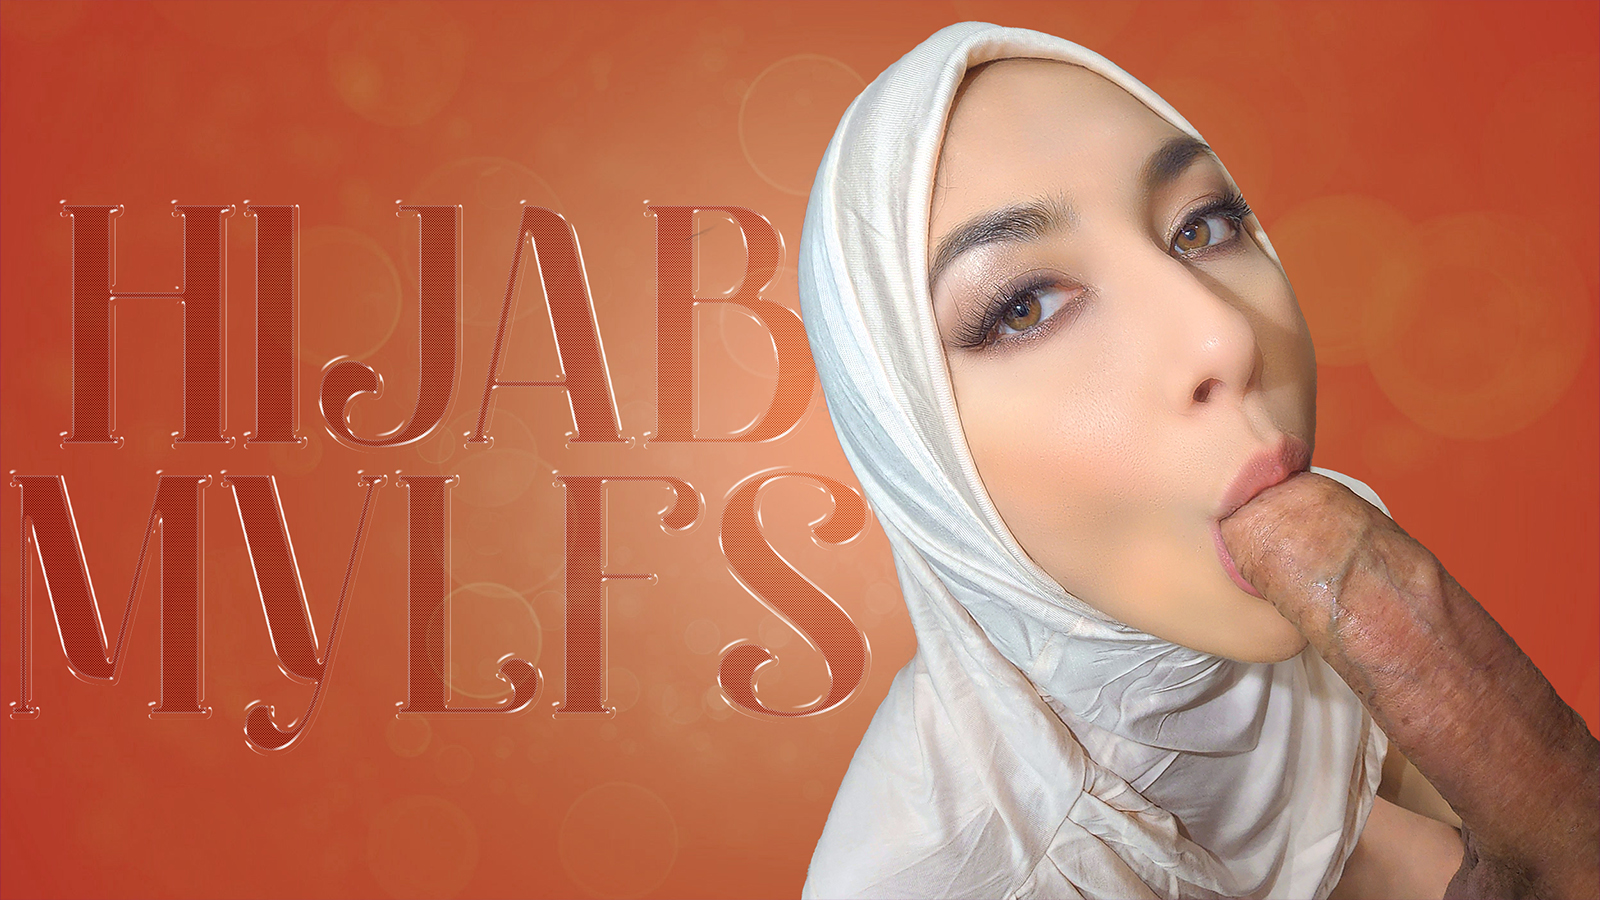 Hijab Mylfs - Isabel Love [1080p] - Cover